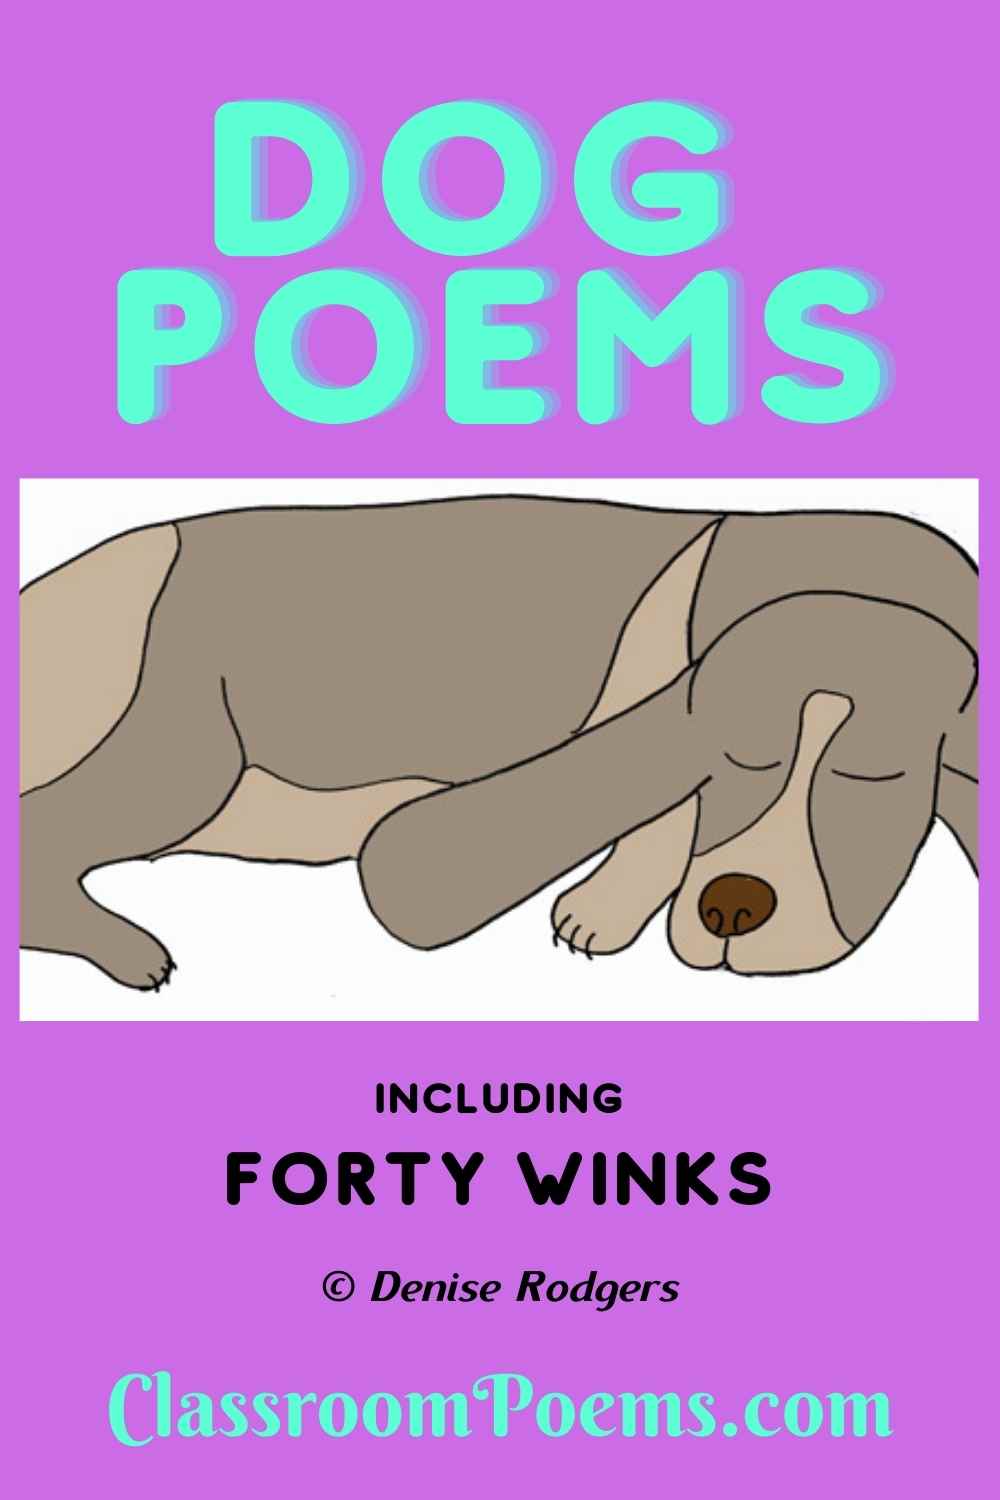 FORTY WINKS, a funny dog poem for kids by Poetry Lady Denise Rodgers on ClassroomPoems.com.